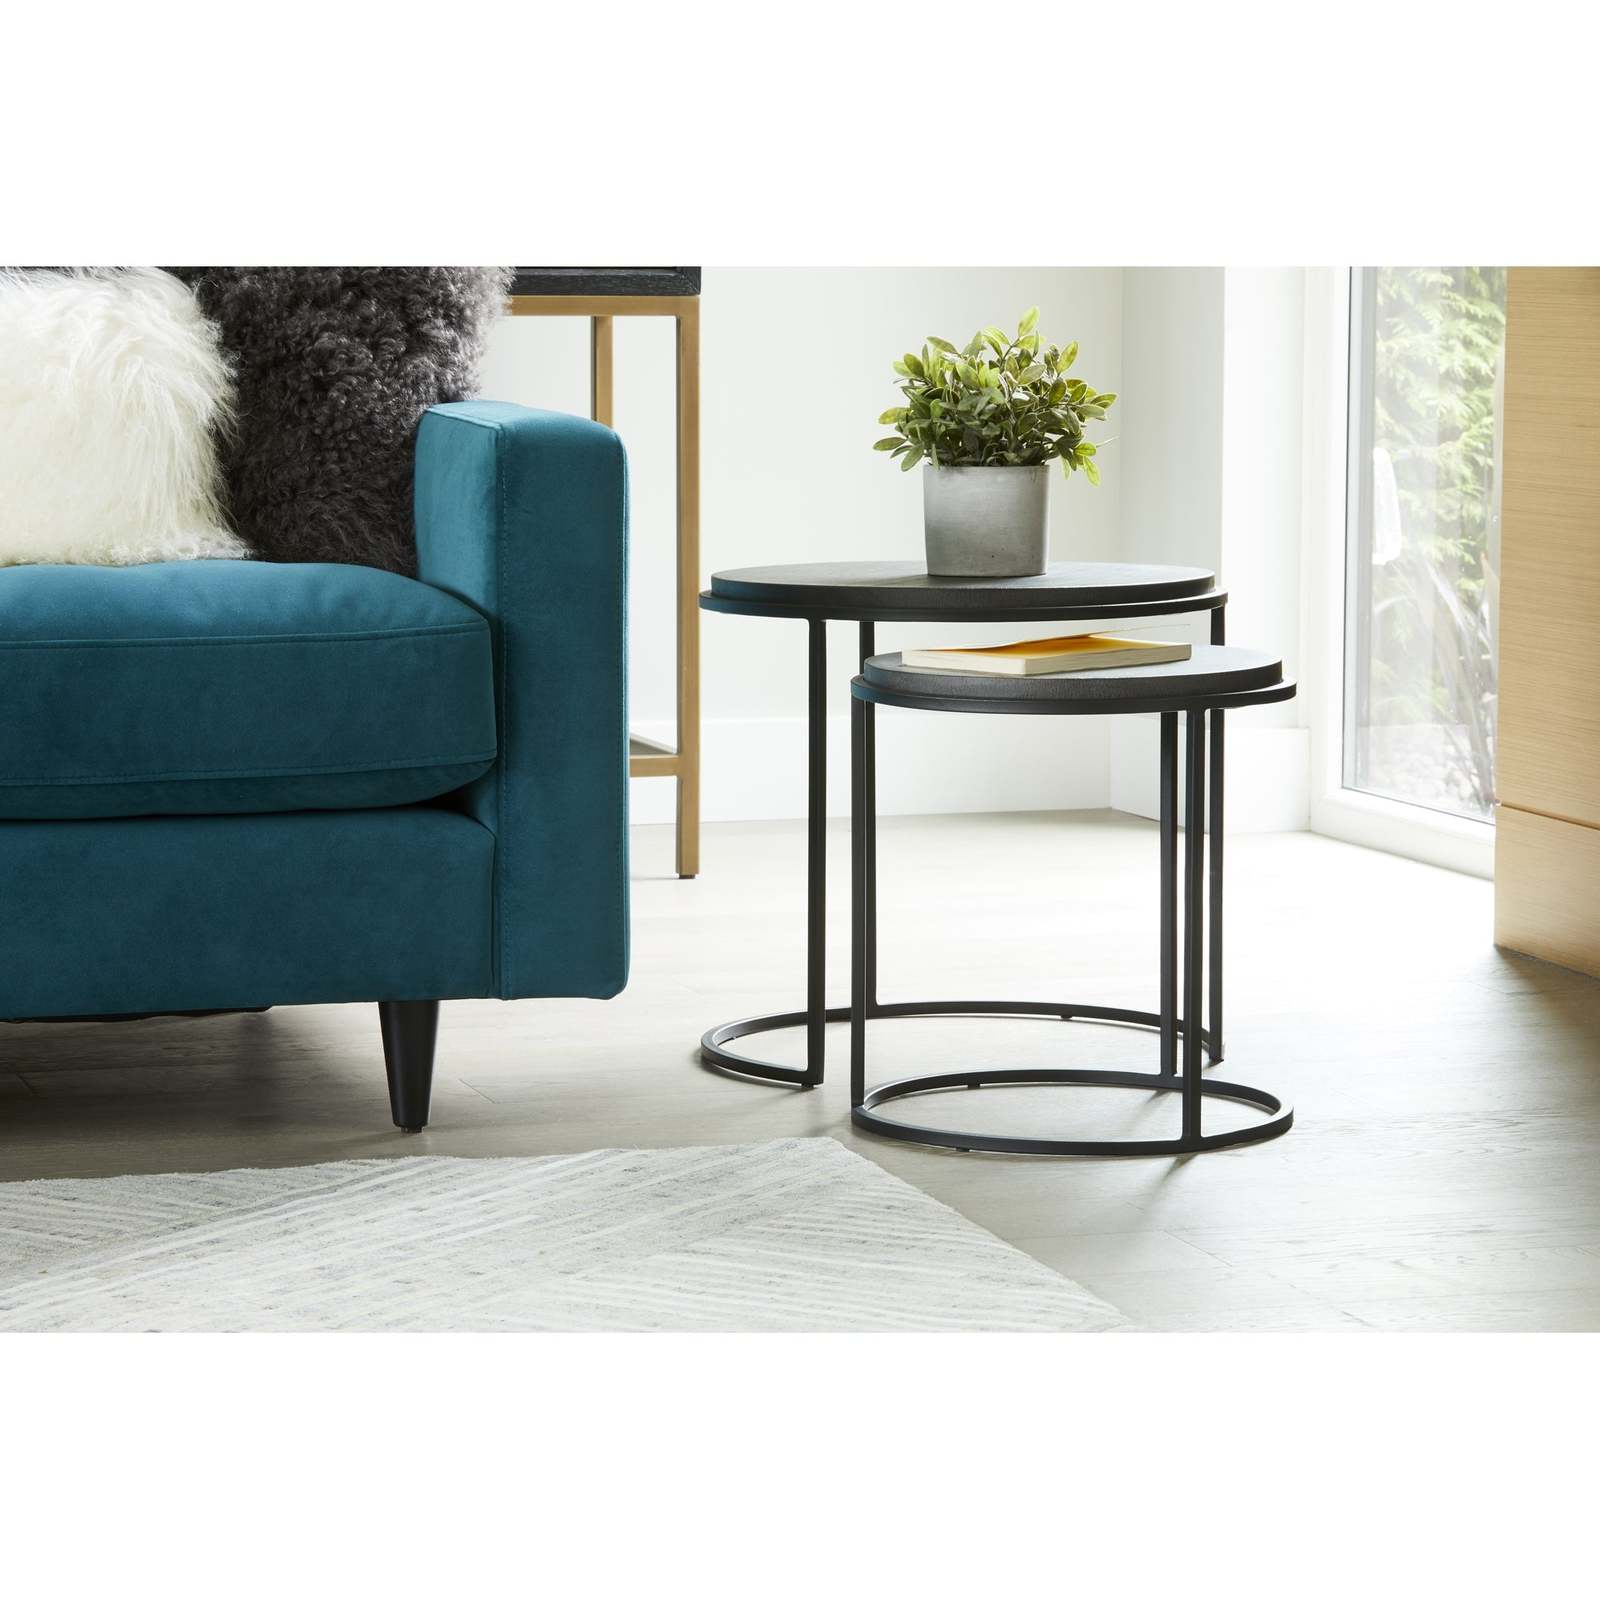 Try a Set of Nesting Side Tables